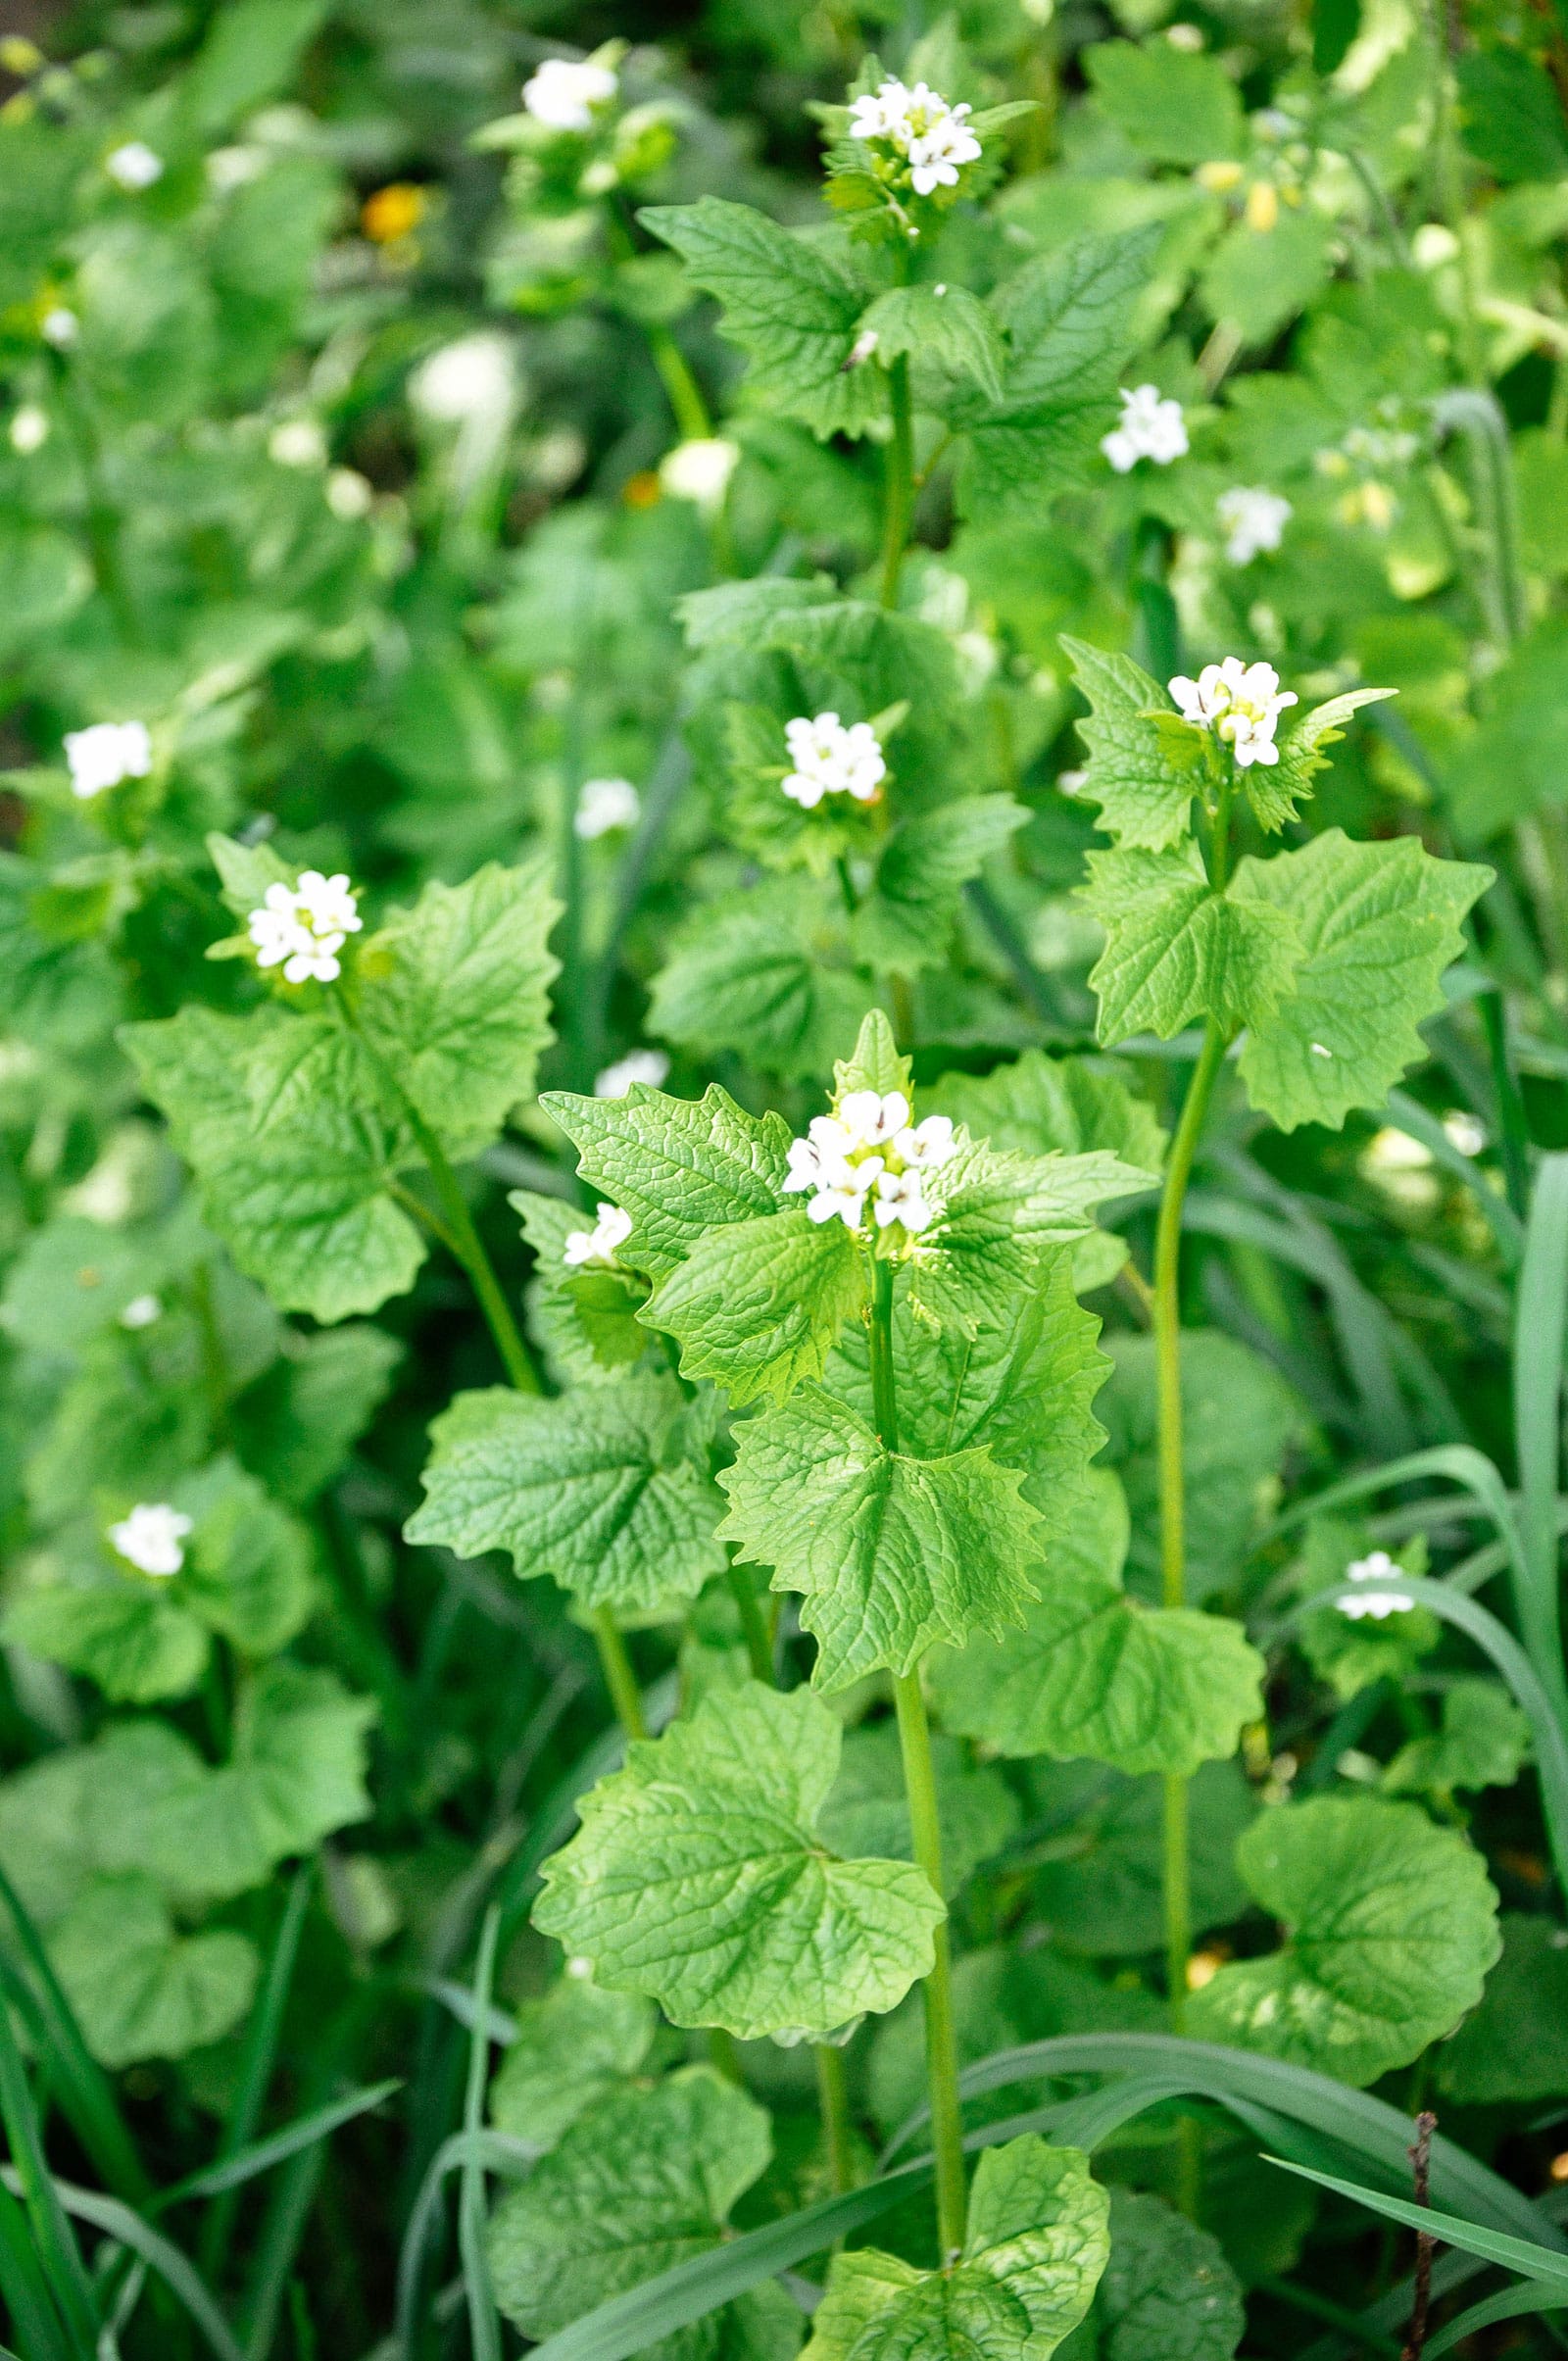 Garlic mustard stems dotted with small white flowers